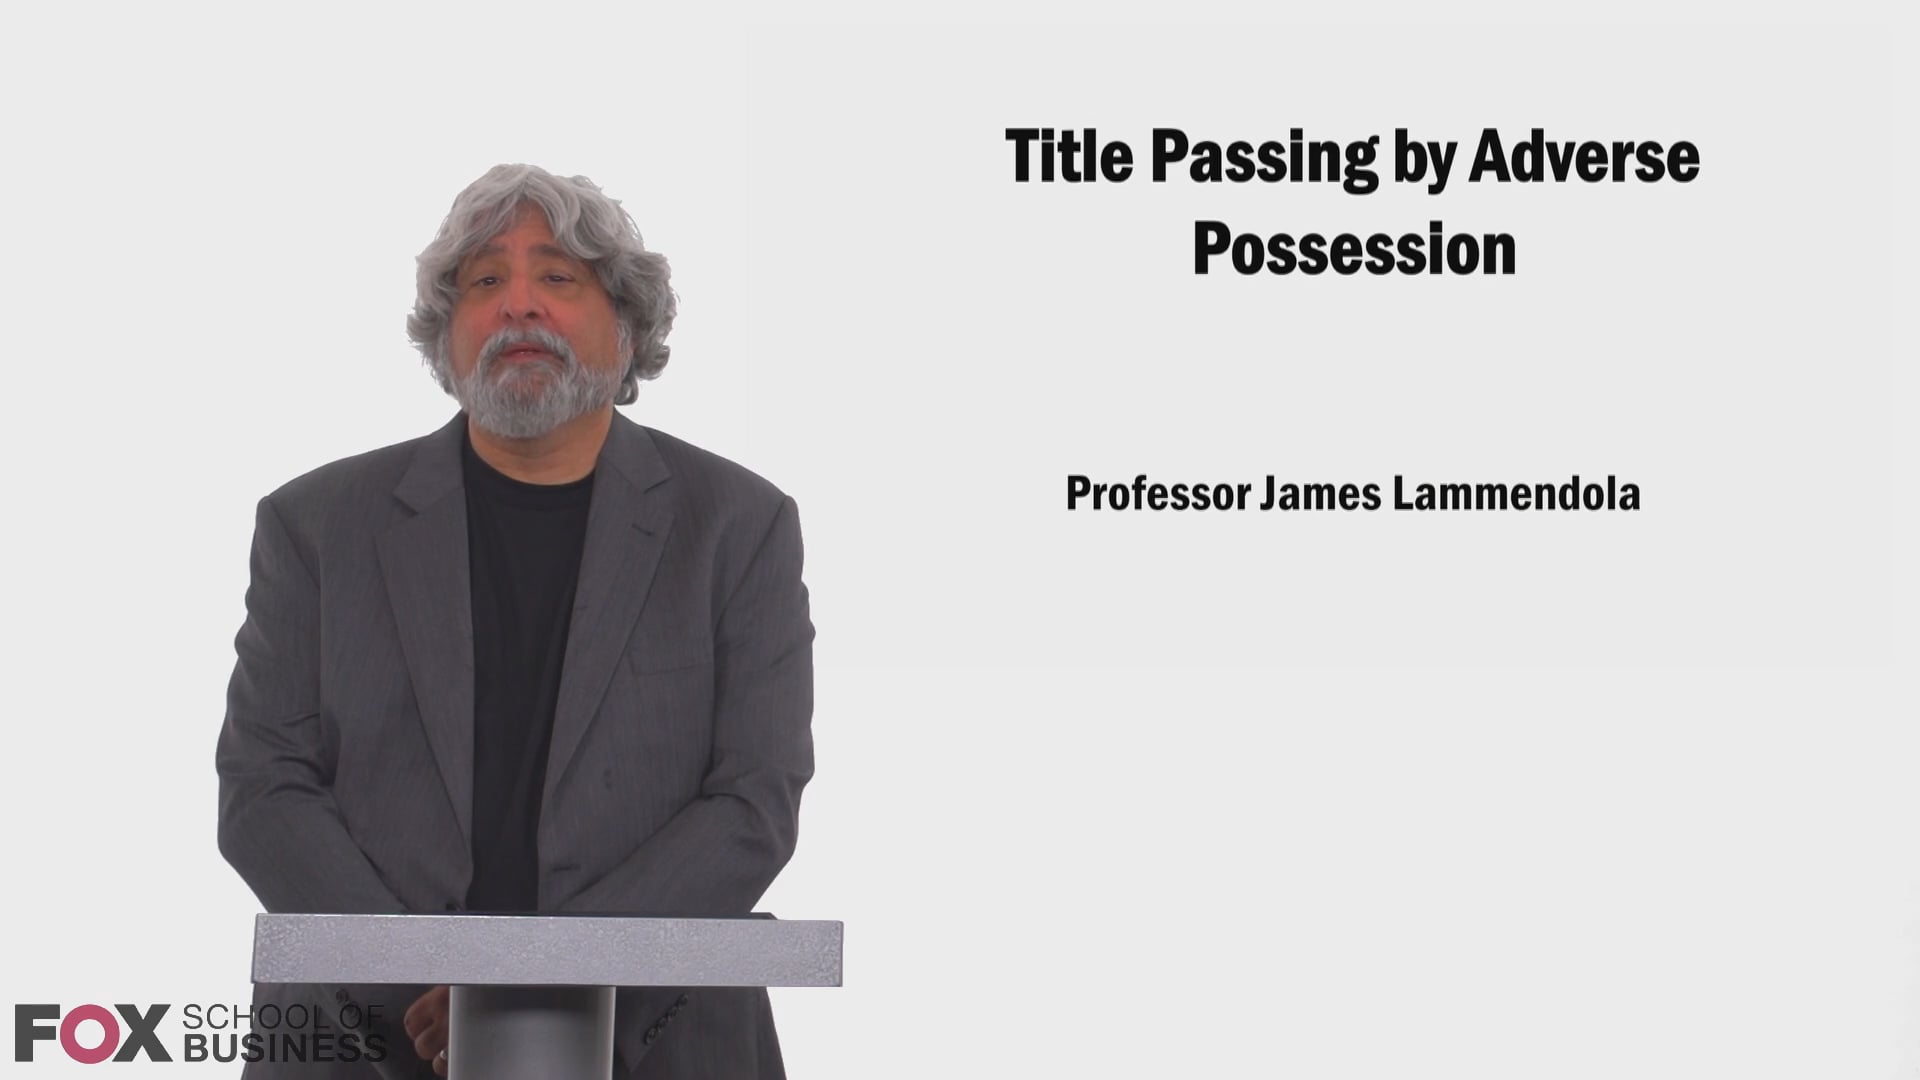 58649Title Passing by Adverse Possession